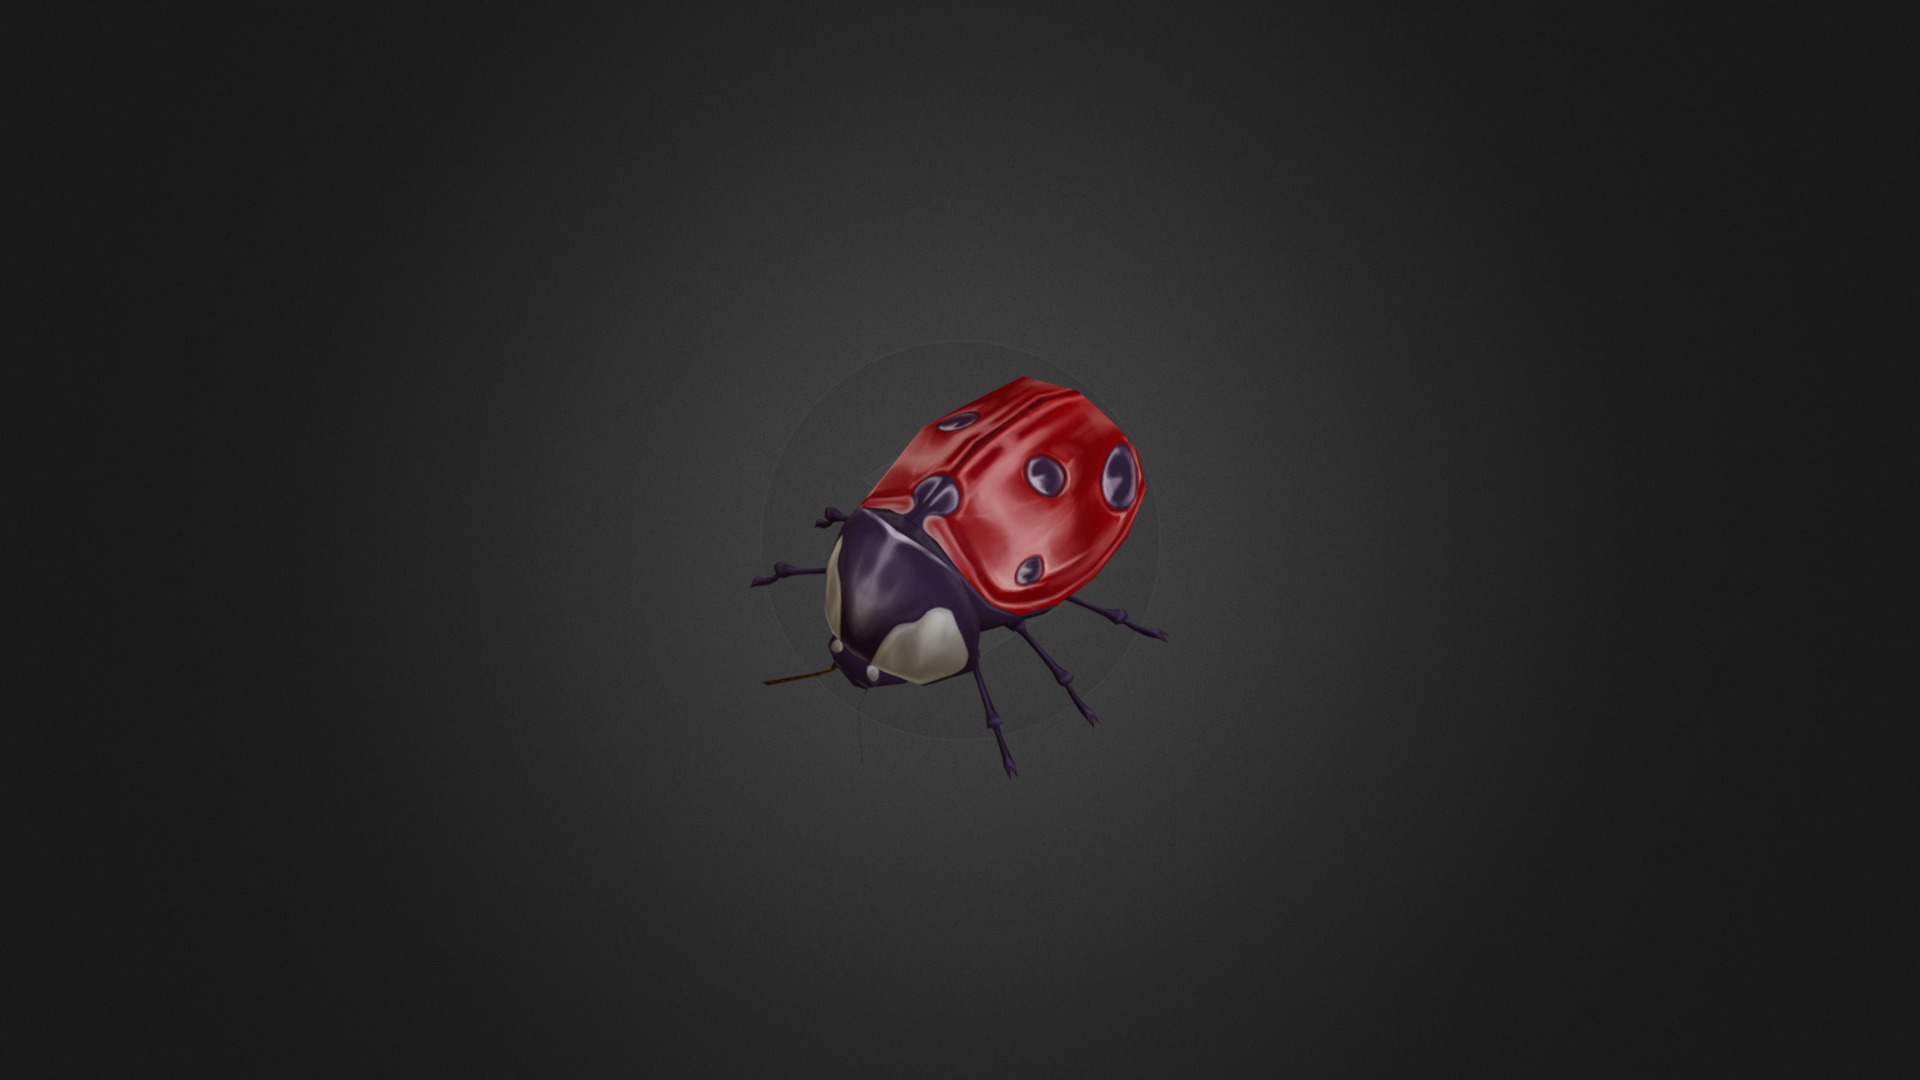 3D model Ladybug - This is a 3D model of the Ladybug. The 3D model is about a ladybug on a black background.